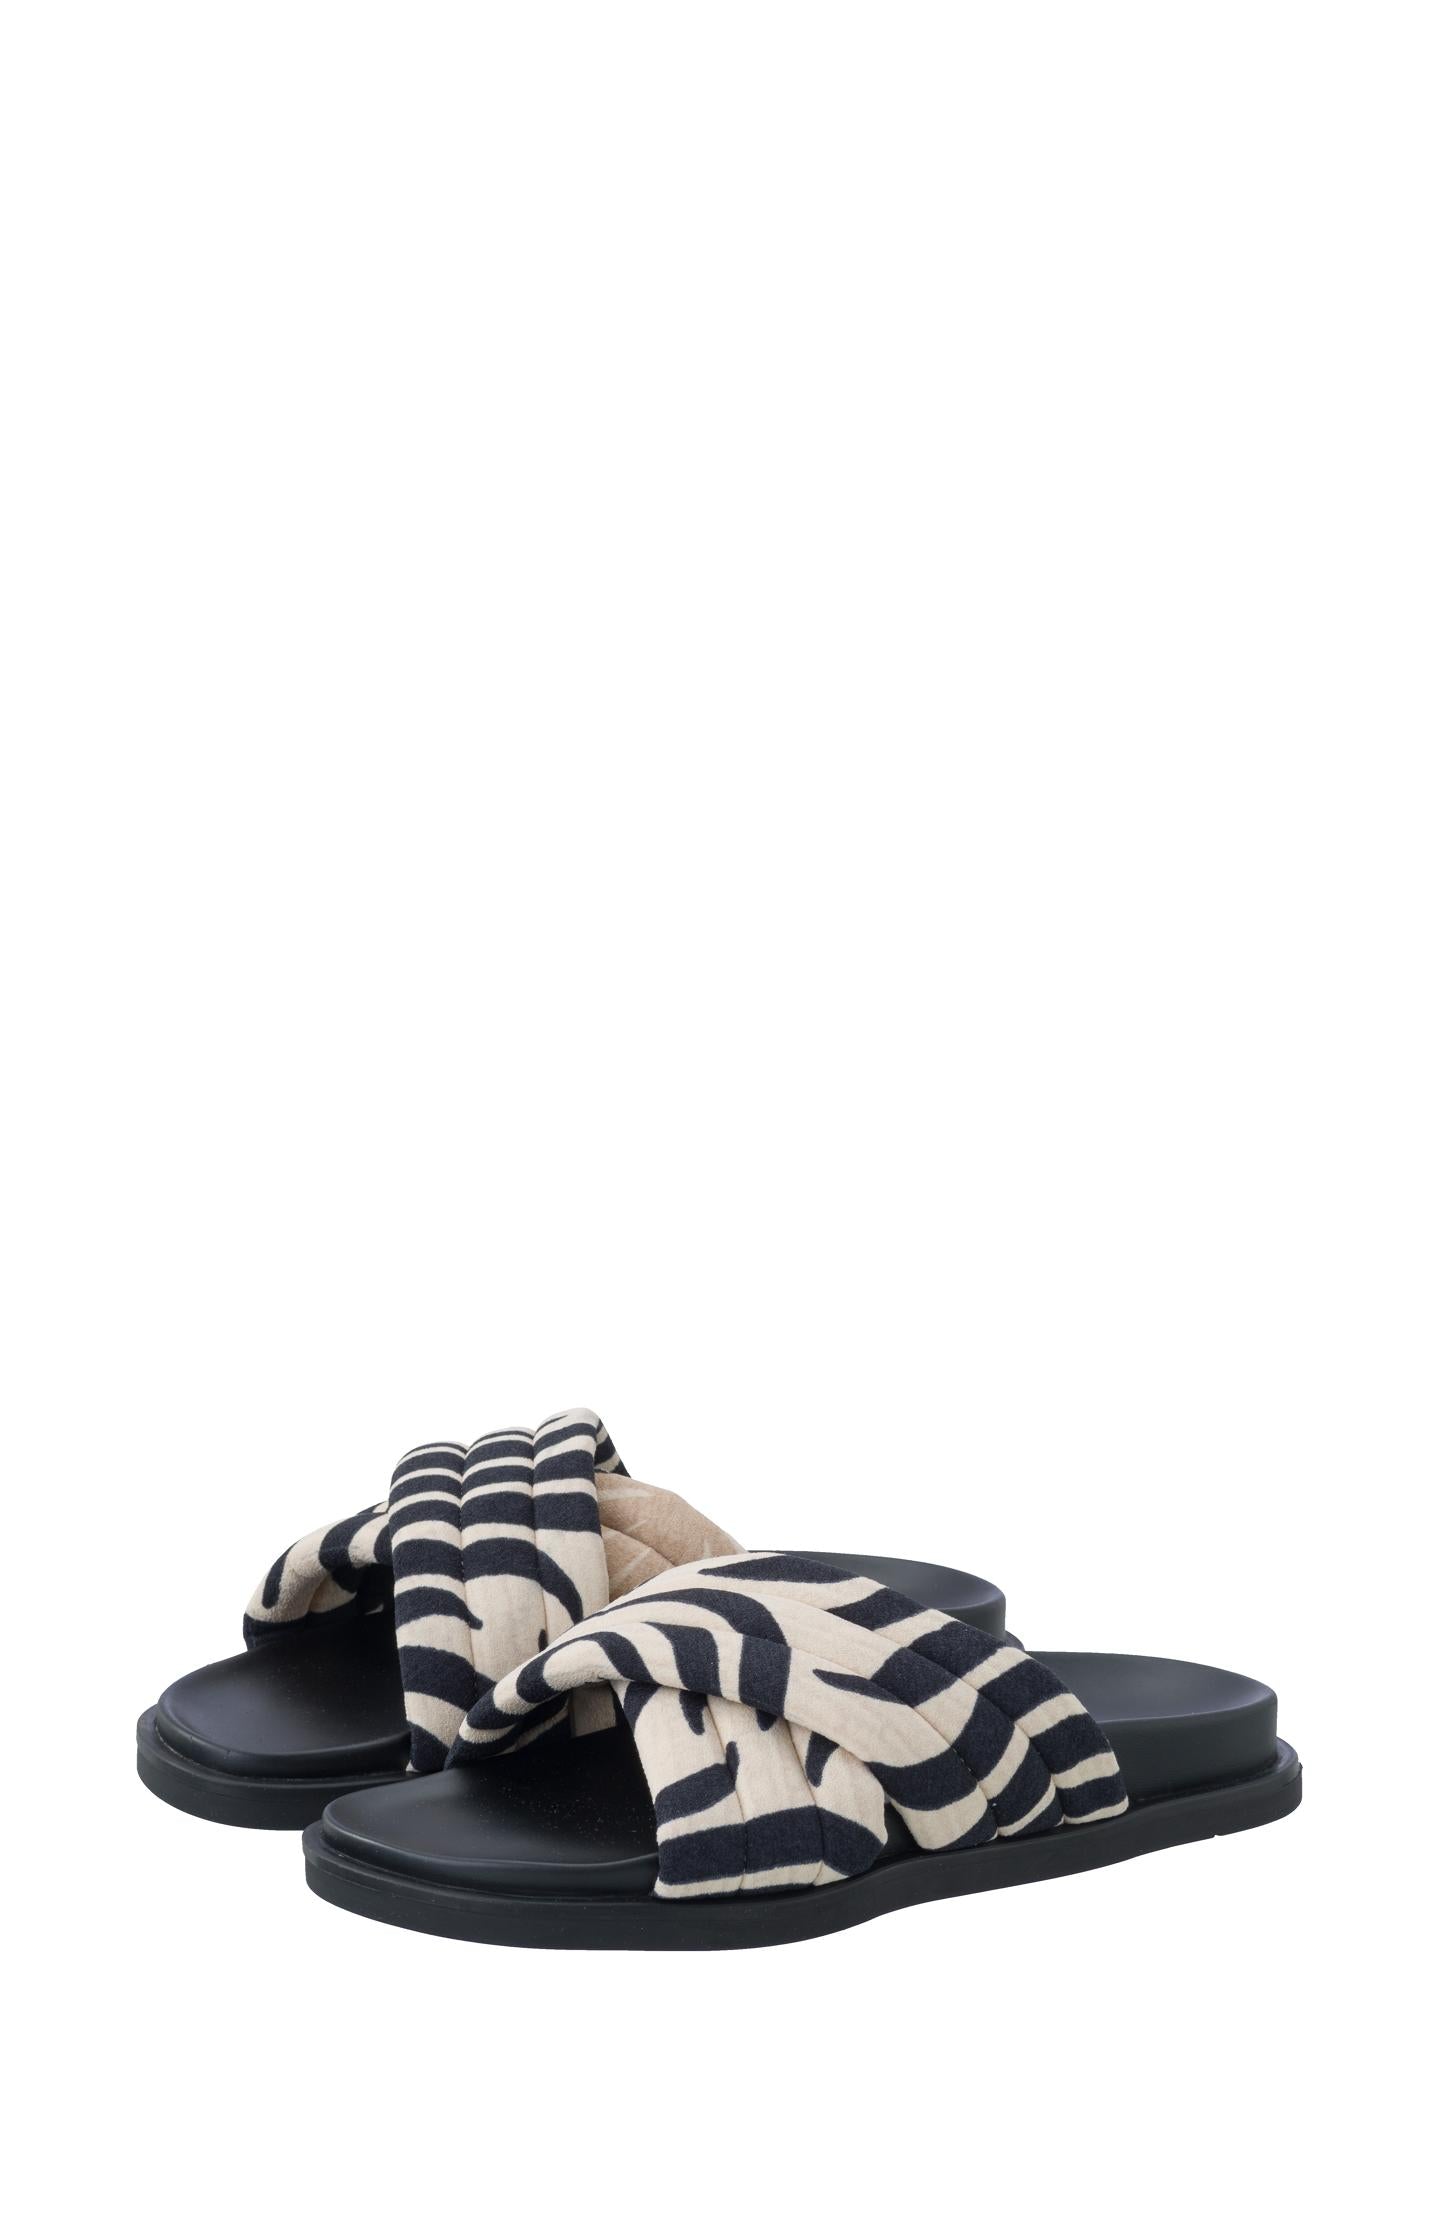 Slipper with crossed straps and retro print - Type: product